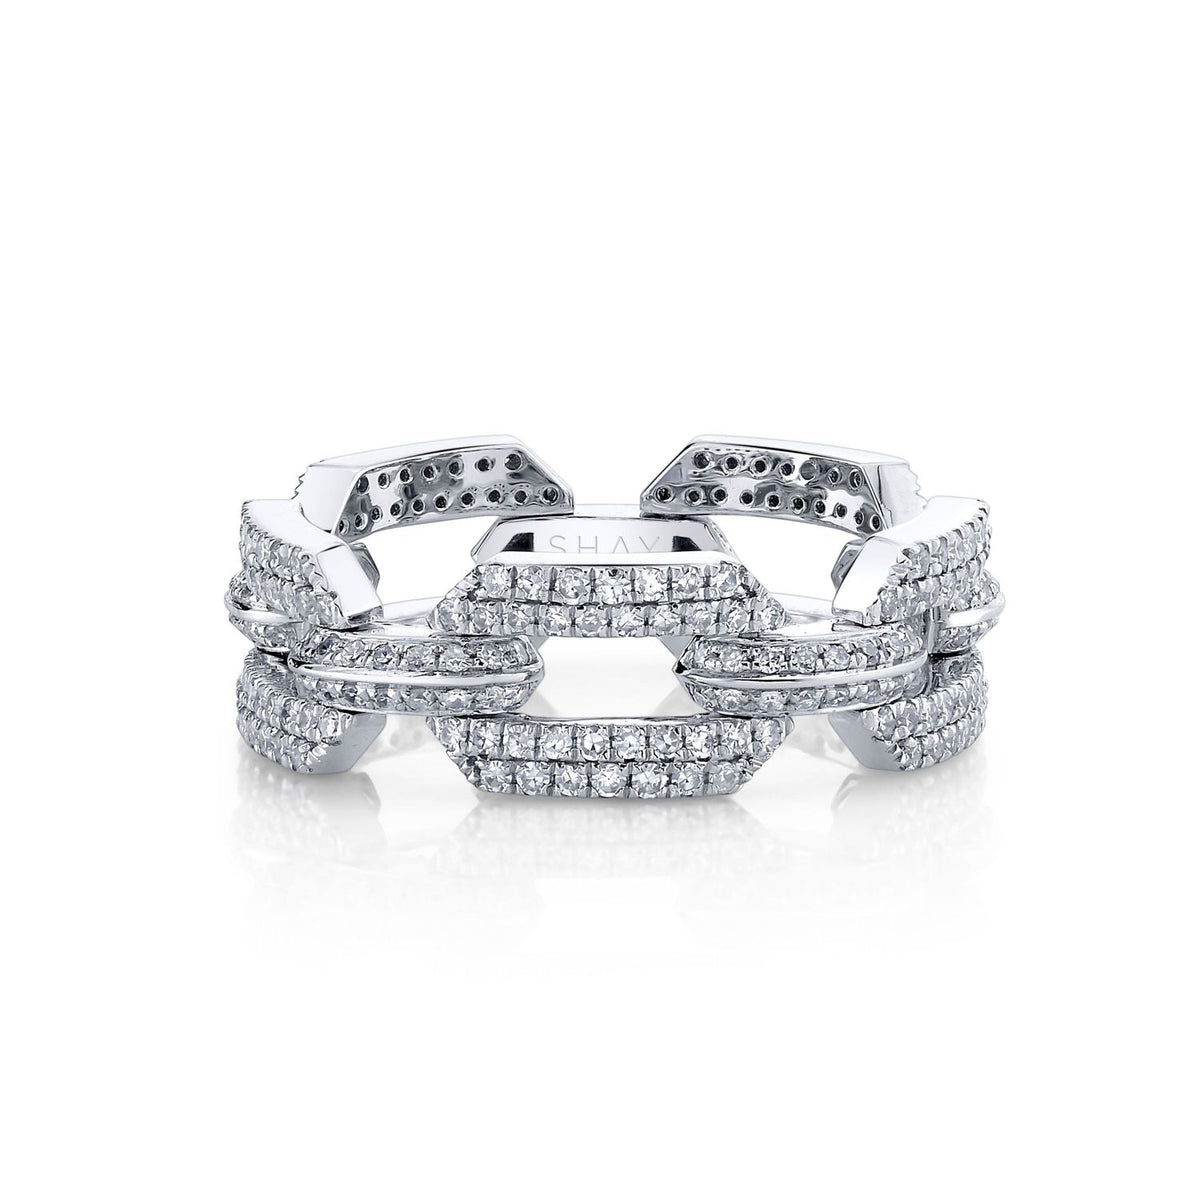 READY TO SHIP DIAMOND PAVE DOME FLAT LINK RING